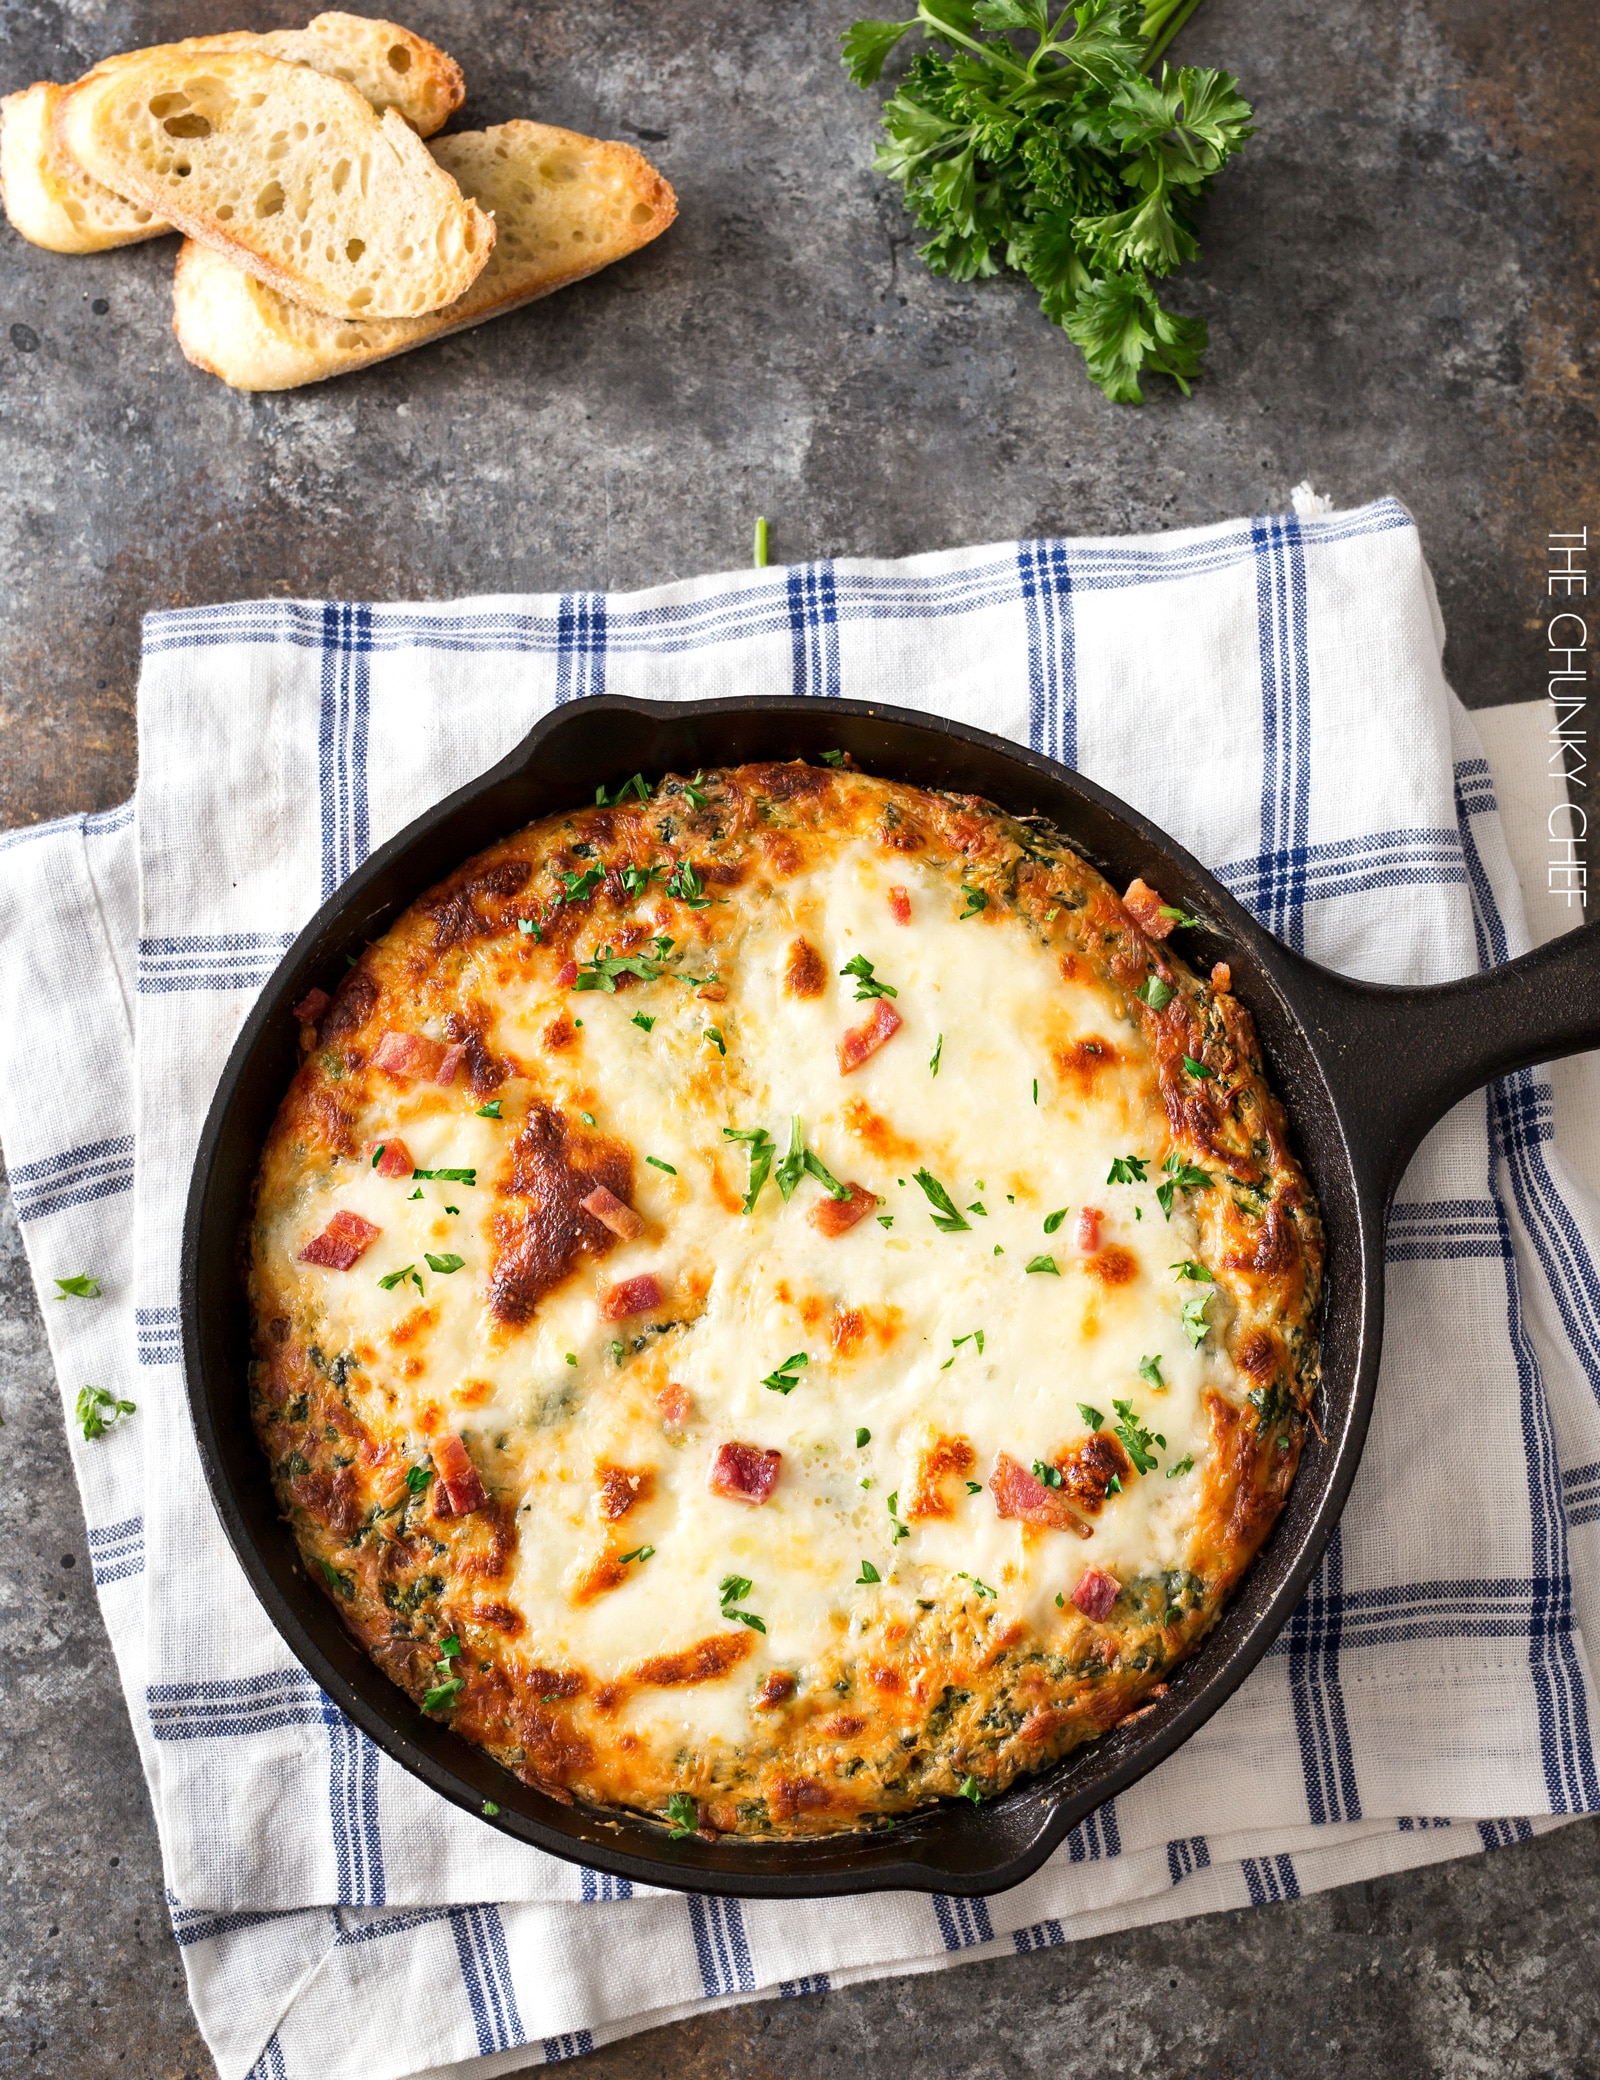 http://www.thechunkychef.com/wp-content/uploads/2016/12/Cheesy-Bacon-Spinach-Dip.jpg